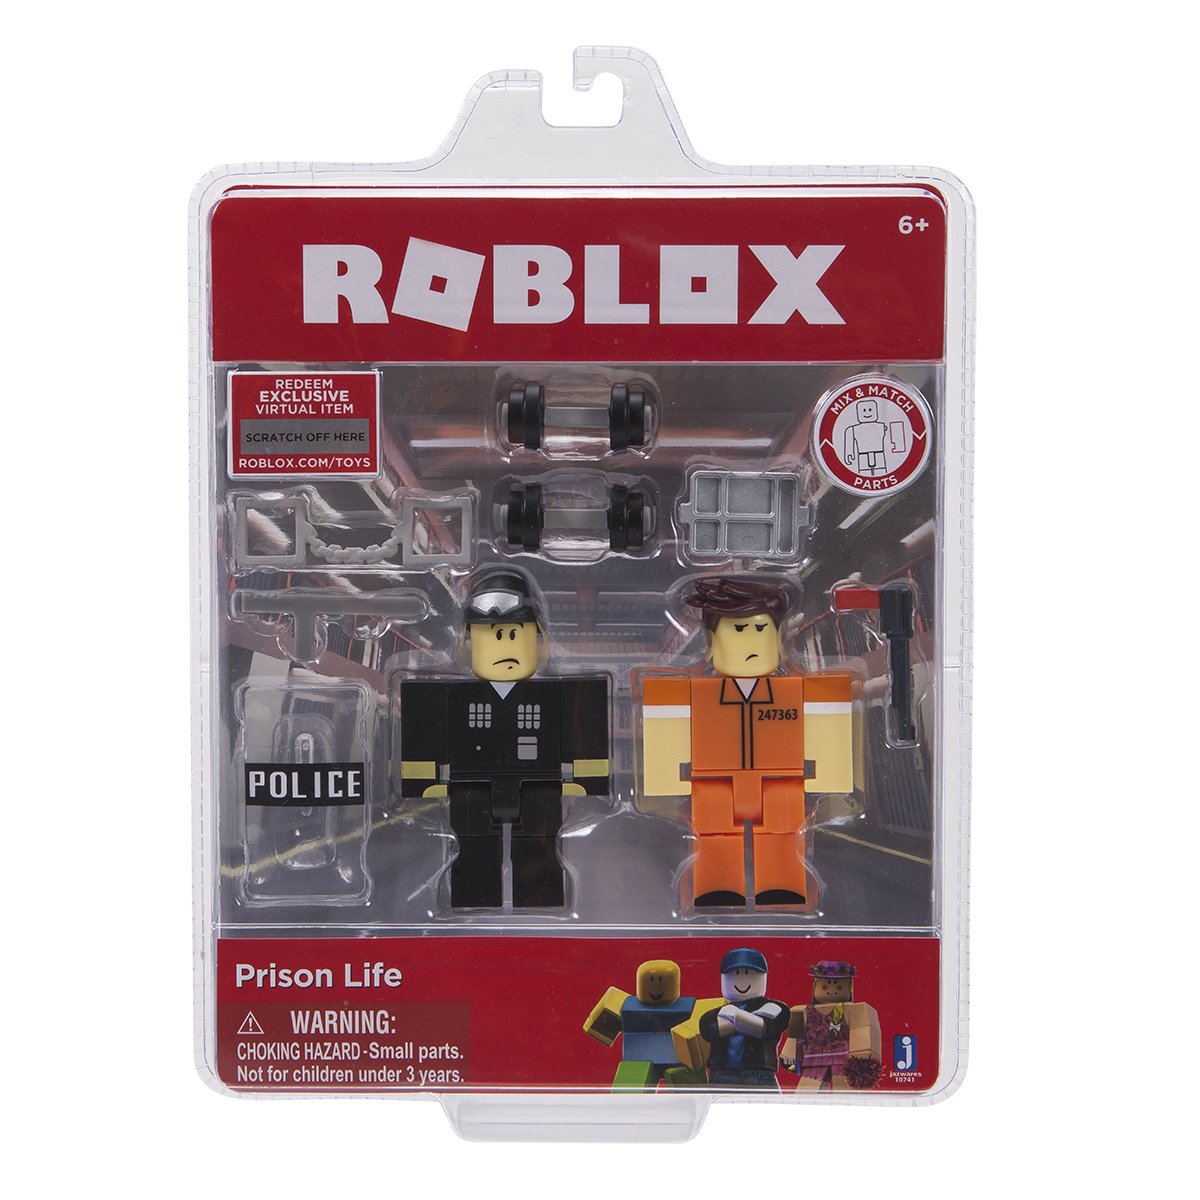 Roblox Prison Life Experience Toys And Games